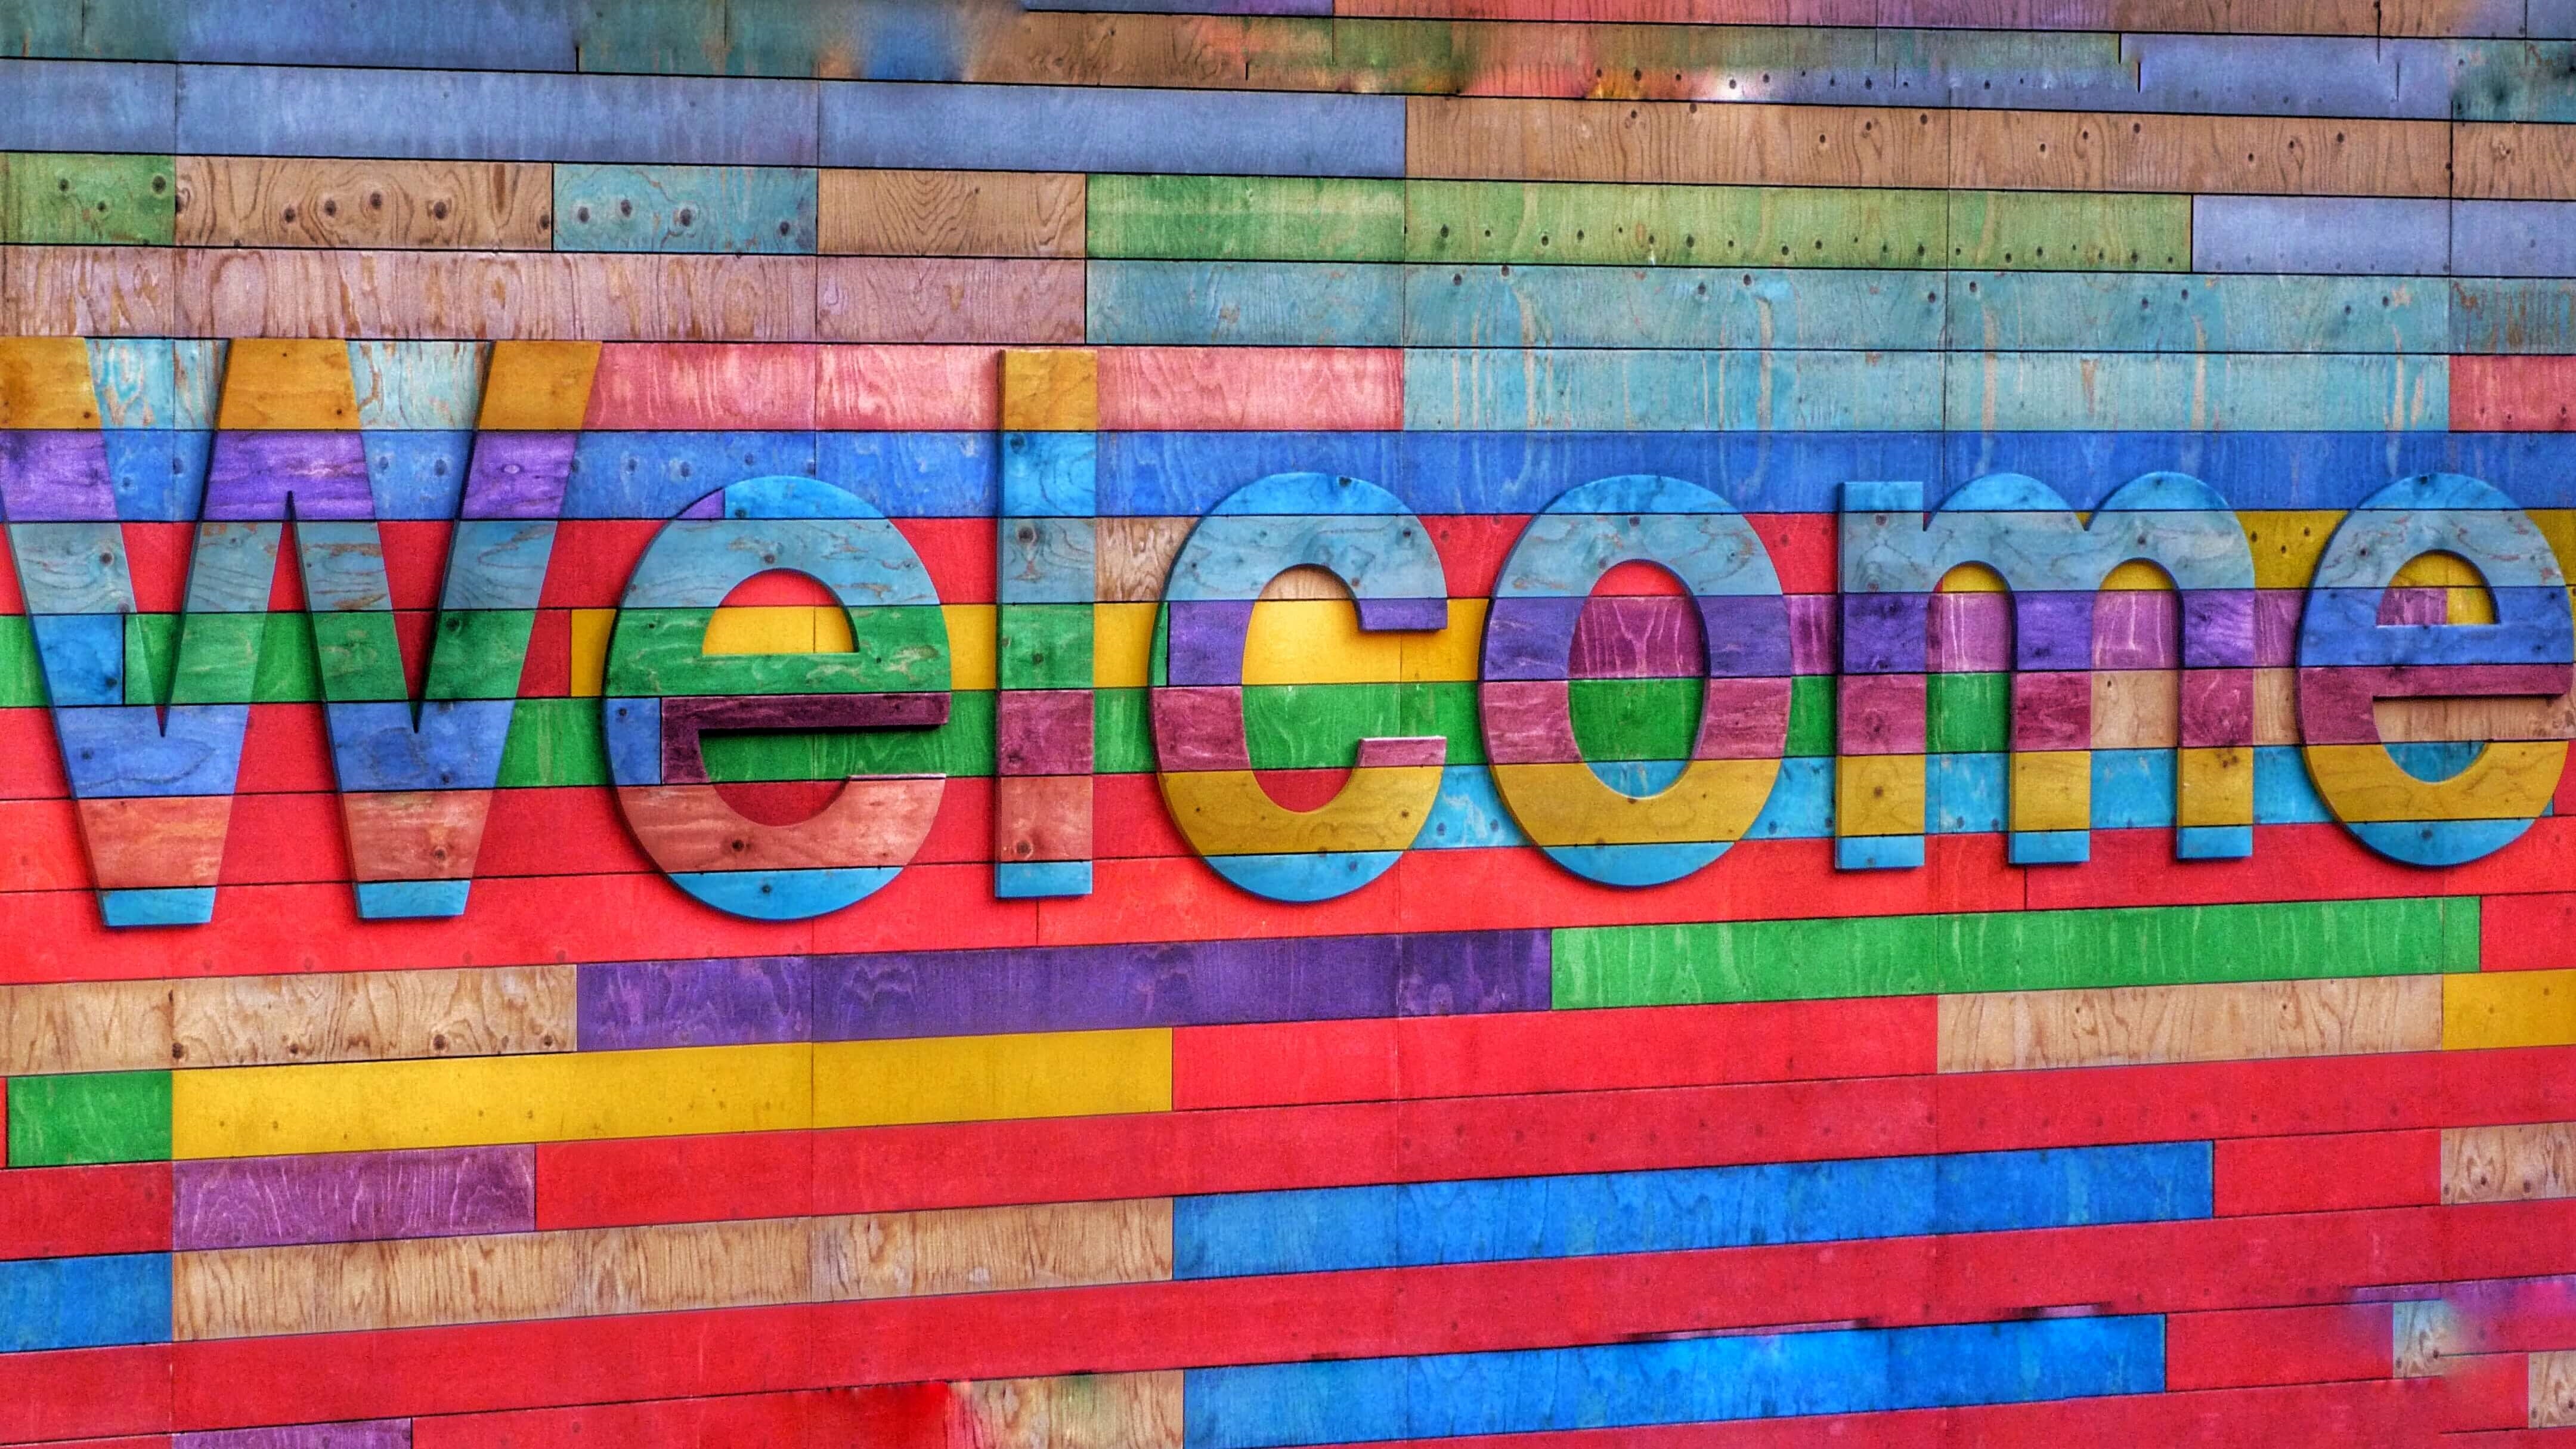 A colourful brick wall that says "Welcome"